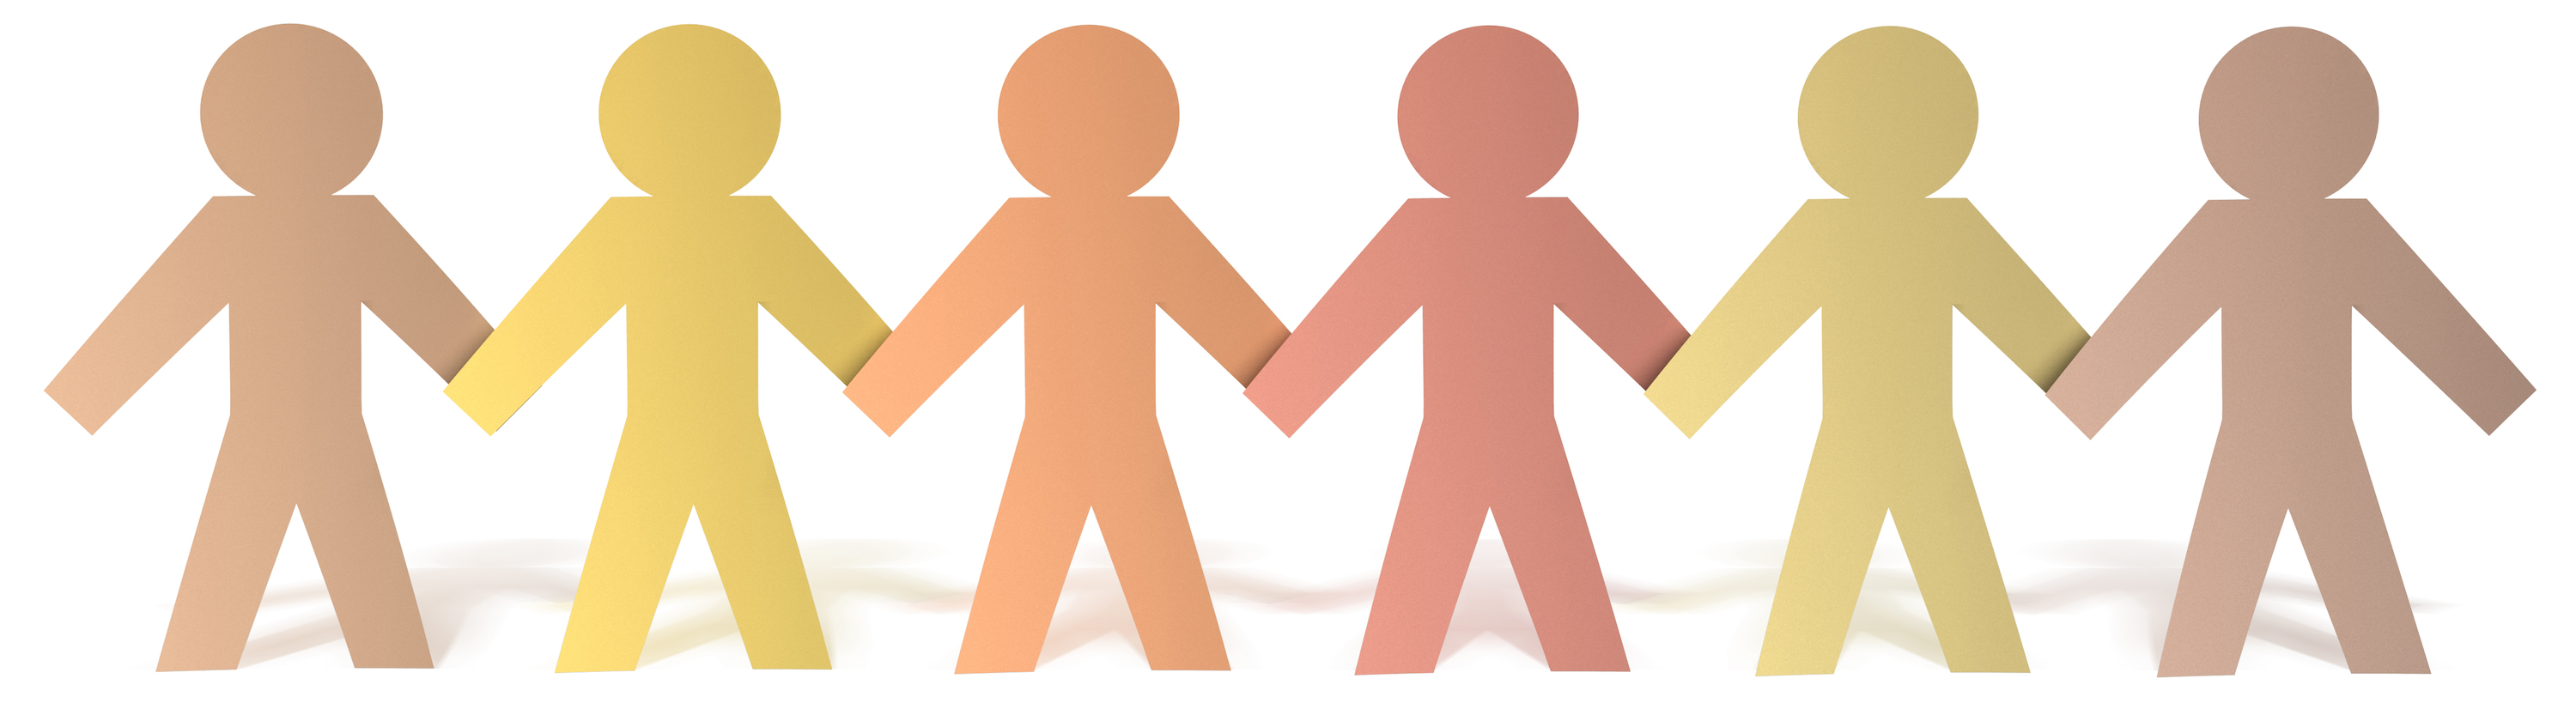 People Holding Hands #2183672 - Holding Hands, Transparent background PNG HD thumbnail